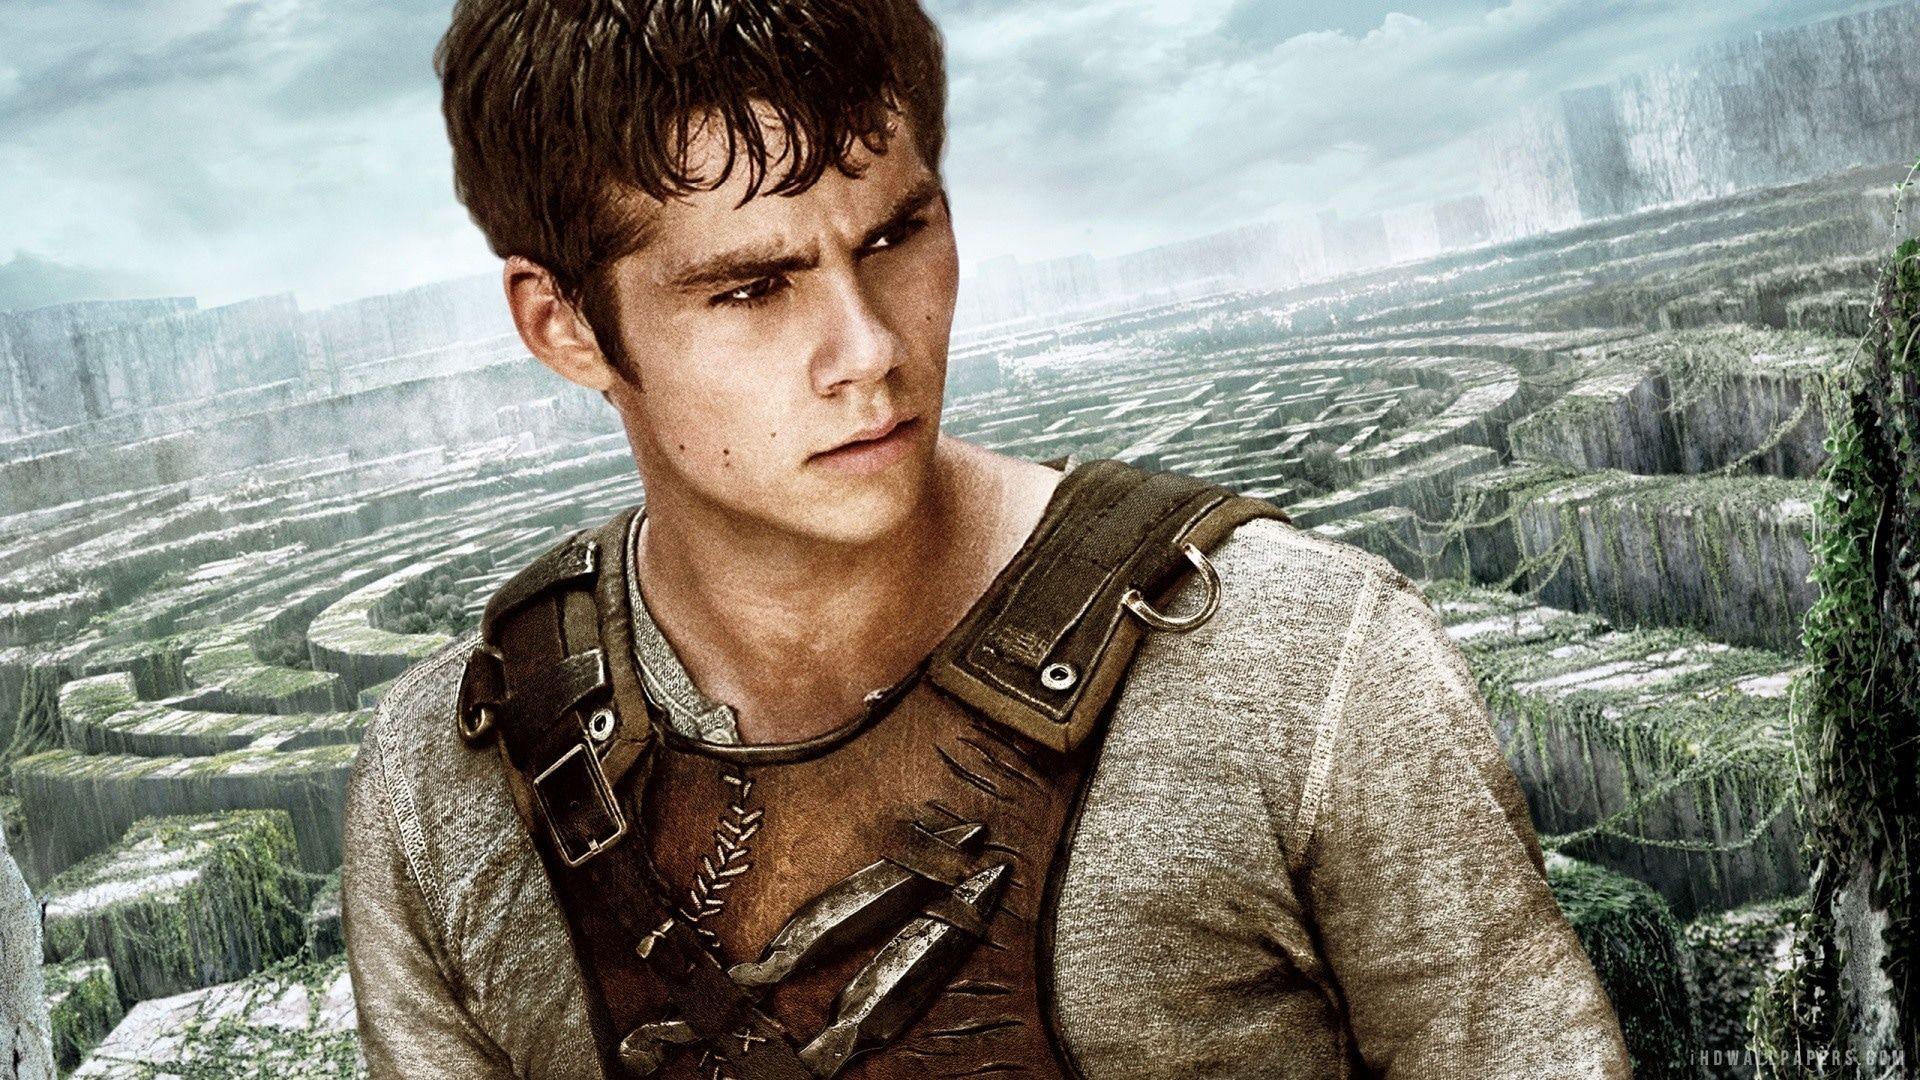 Dylan O'Brien severely injured in accident on set of Maze Runner